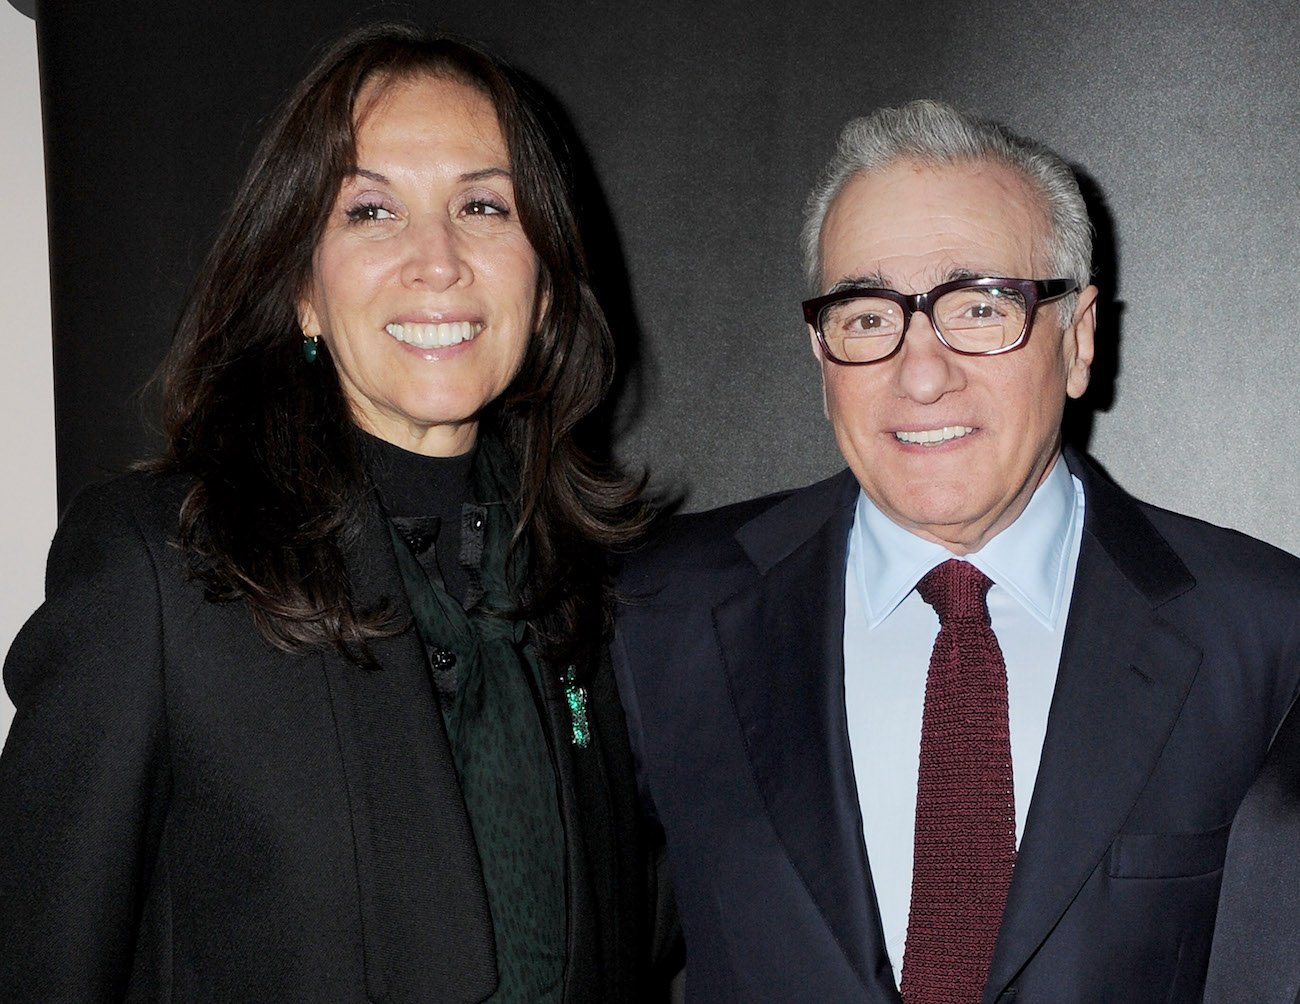 George Harrison's wife, Olivia Harrison, and Martin Scorsese at a BFI Southbank Screening event in 2011.